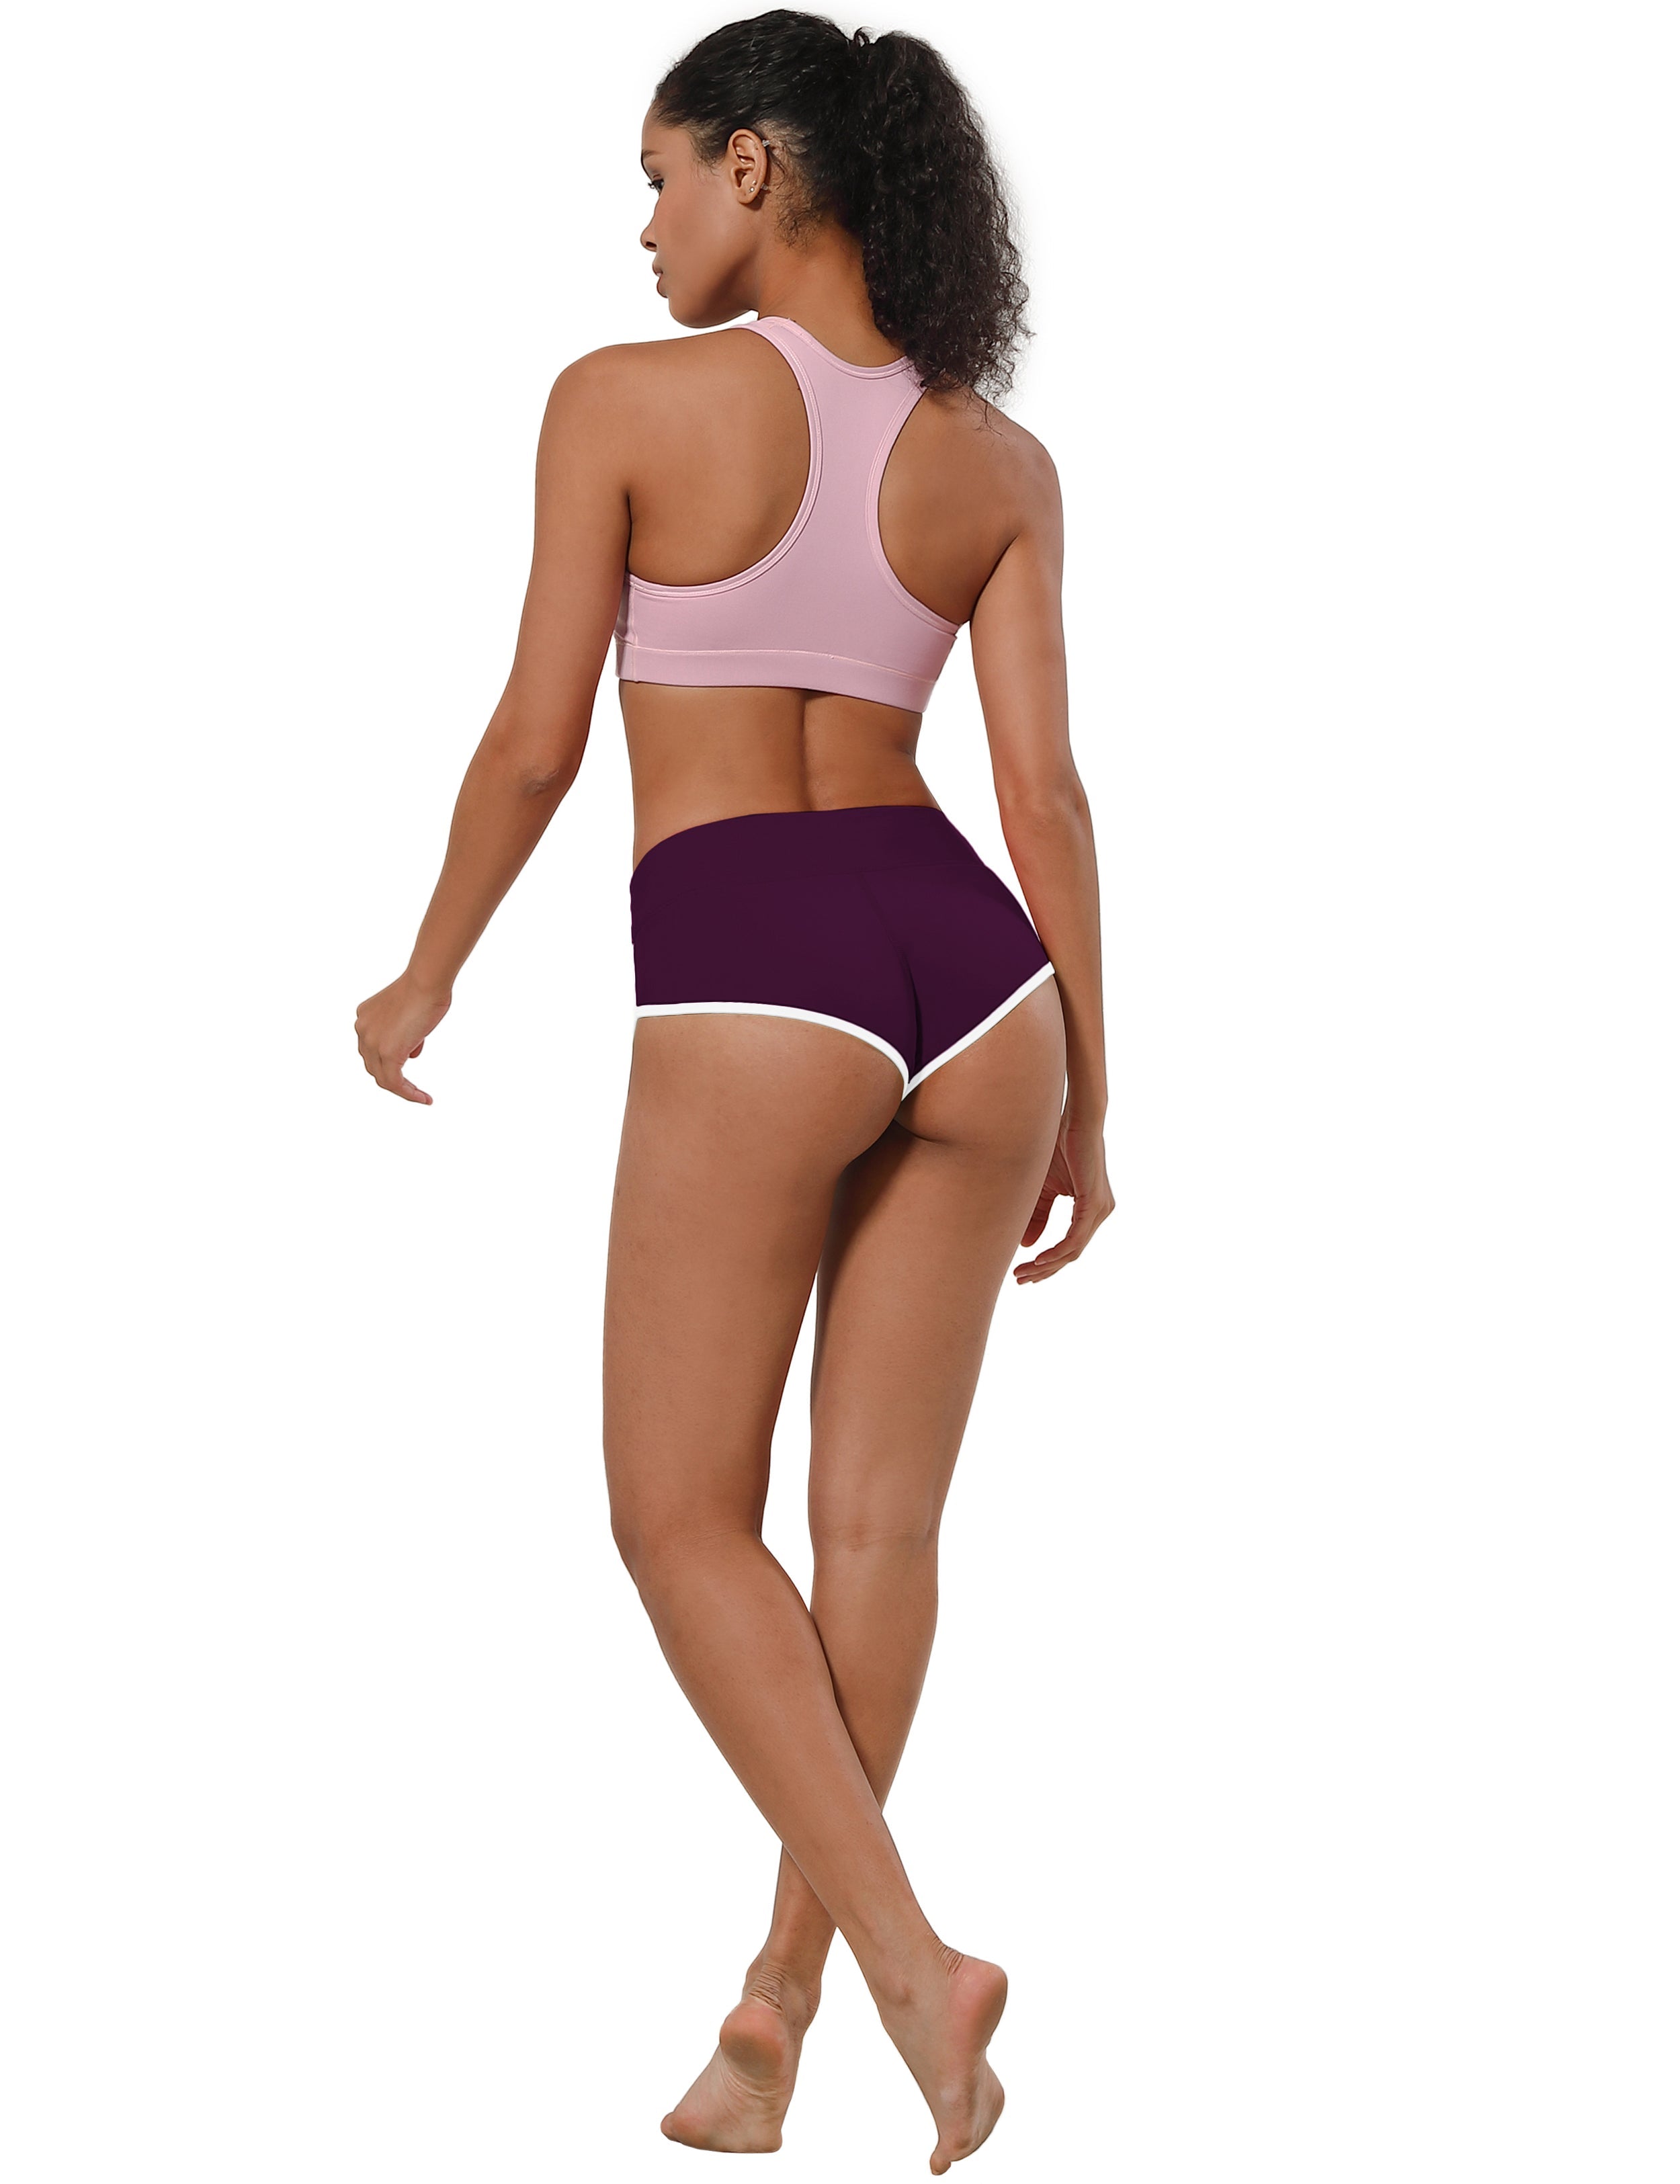 Sexy Booty Jogging Shorts plum Sleek, soft, smooth and totally comfortable: our newest sexy style is here. Softest-ever fabric High elasticity High density 4-way stretch Fabric doesn't attract lint easily No see-through Moisture-wicking Machine wash 75%Nylon/25%Spandex